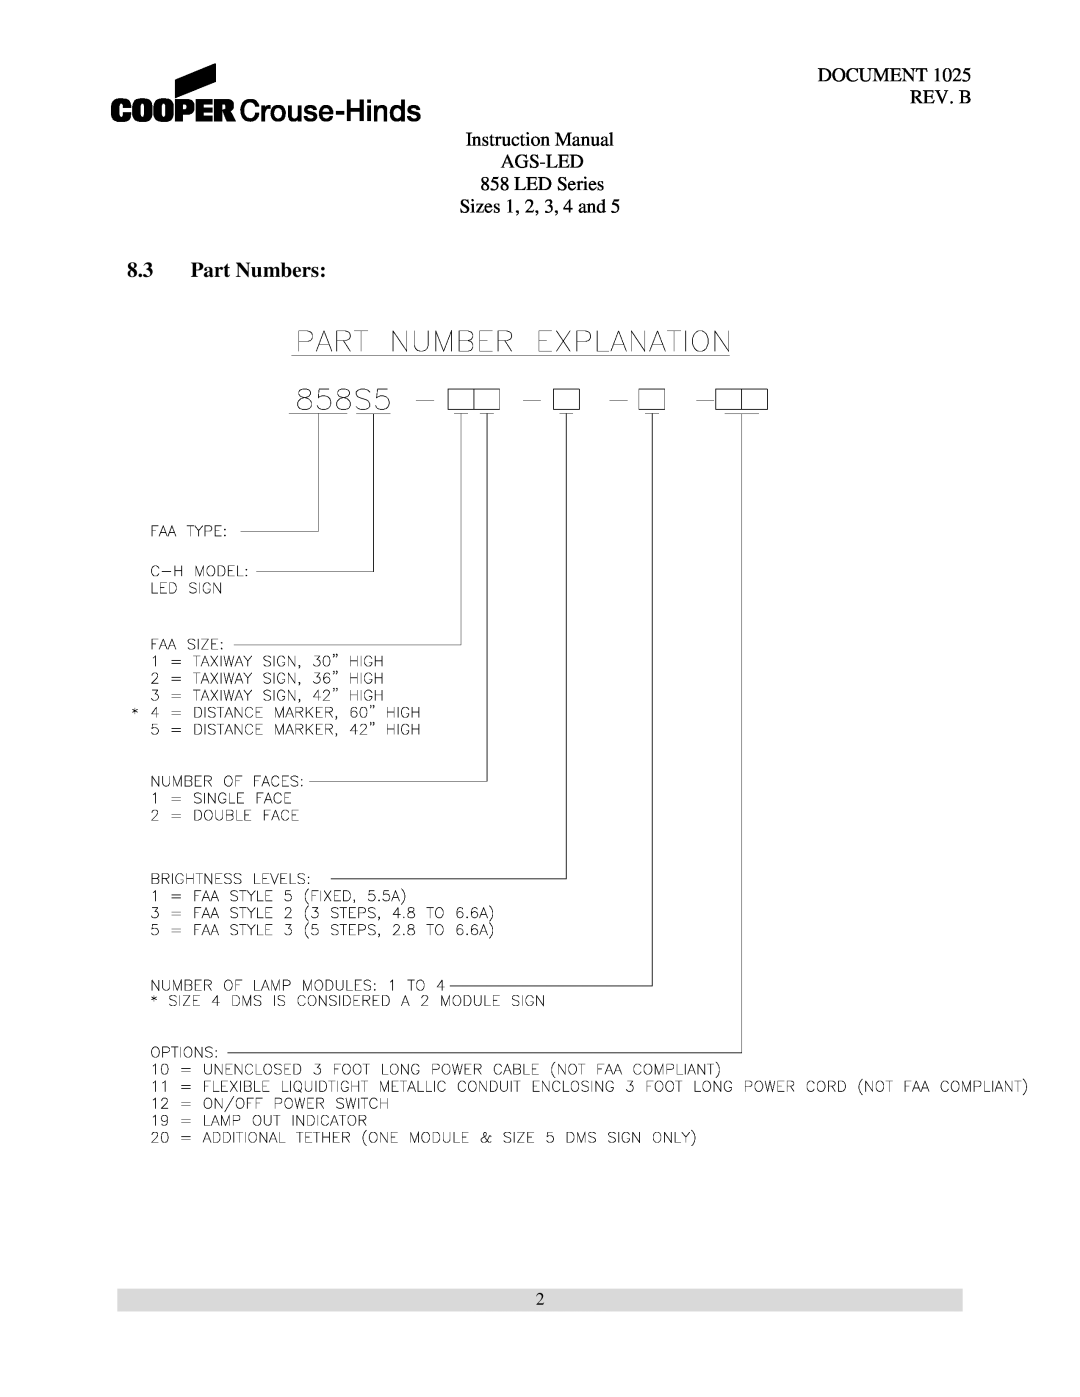 Cooper Bussmann 858 8.3Part Numbers, DOCUMENT REV. B Instruction Manual AGS-LED, LED Series Sizes 1, 2, 3, 4 and 